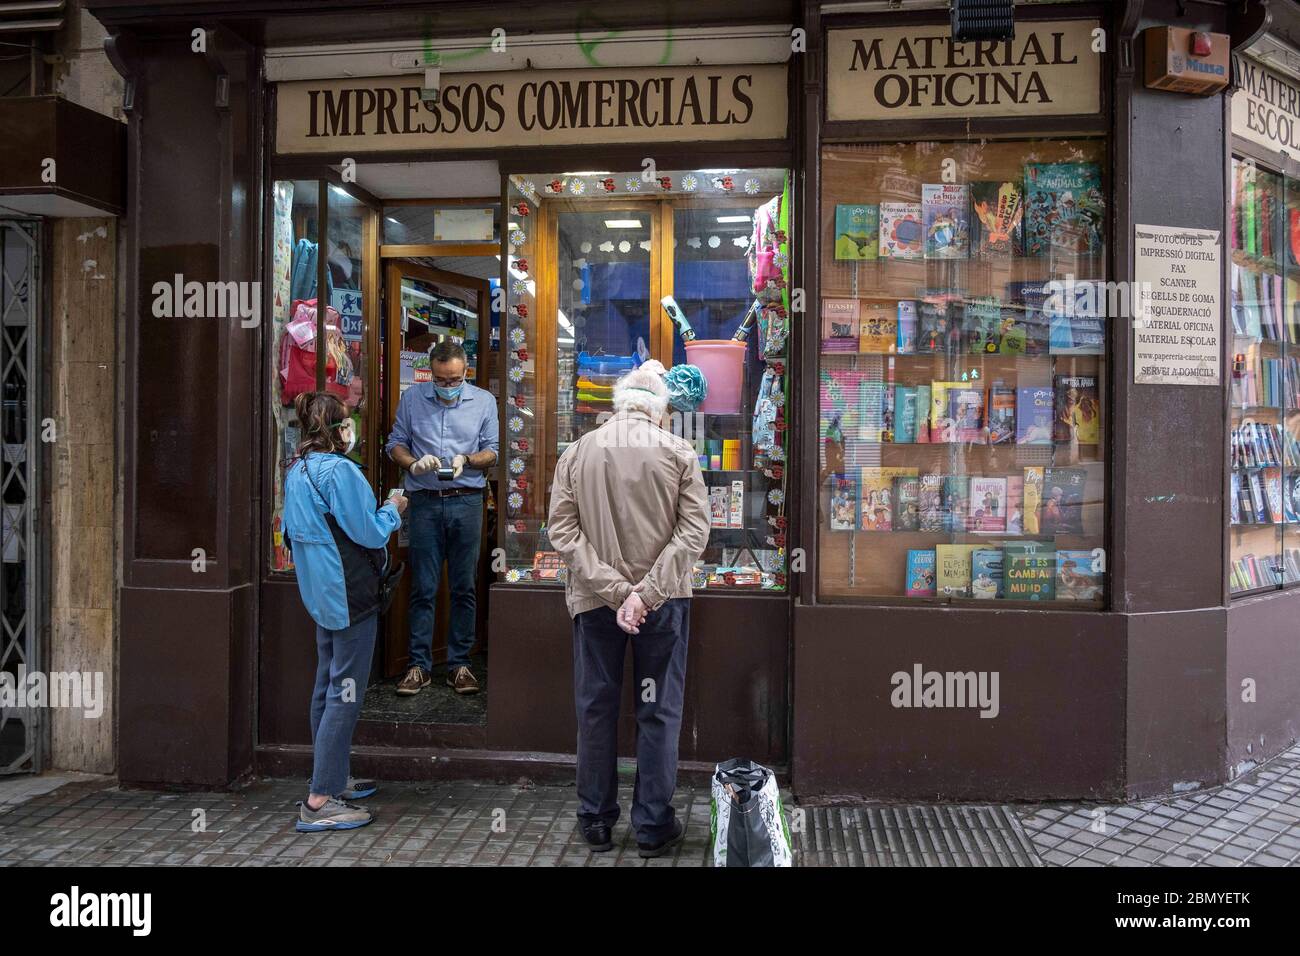 Barcelona, Spain. 9th May, 2020. Two clients of the Canut stationery shop  make purchases from abroad during the breakdown of the confinement with  Phase zero of the Covid-19.Proximity retail trade opens its